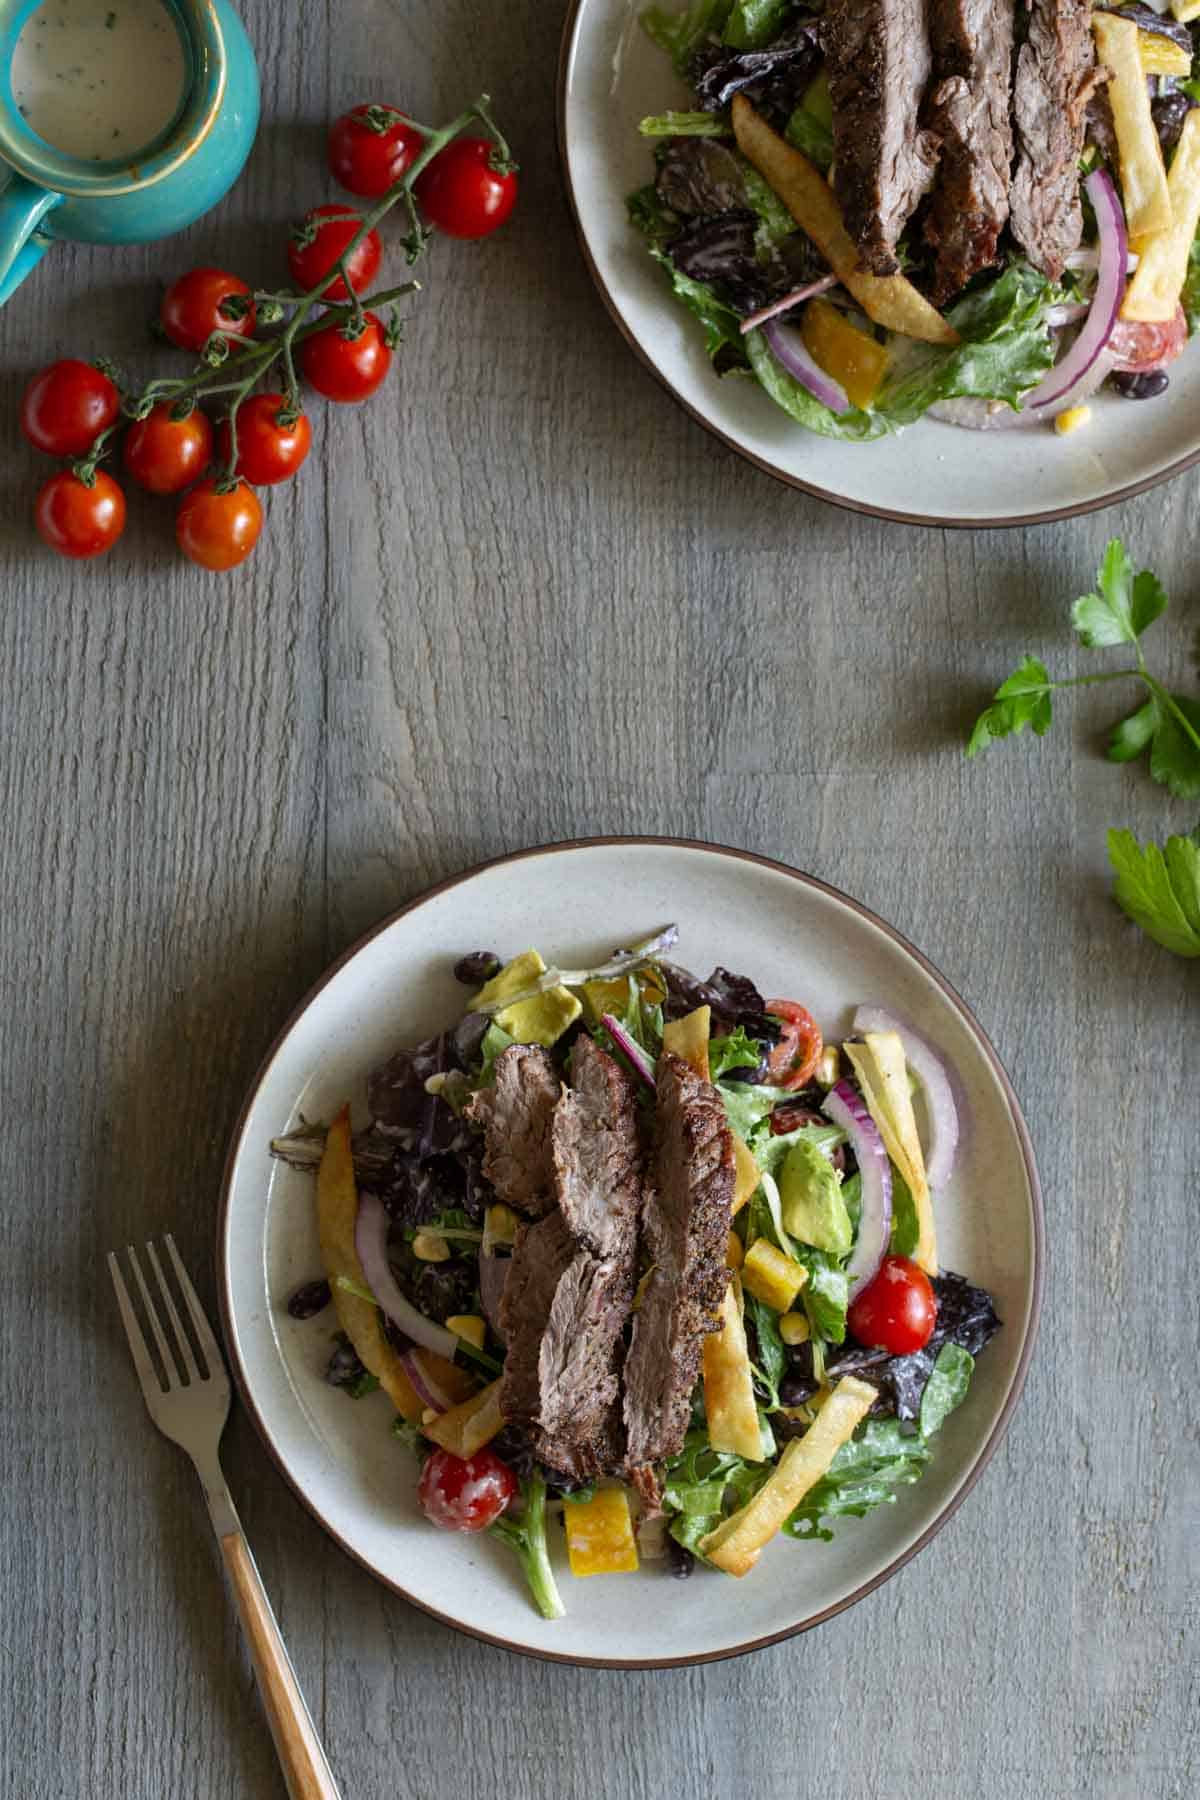 Two plates of steak salad with vegetables, tortilla strips, and dressing on a wooden table, surrounded by a fork, cherry tomatoes on a vine, a sprig of parsley, and a small container of dressing.